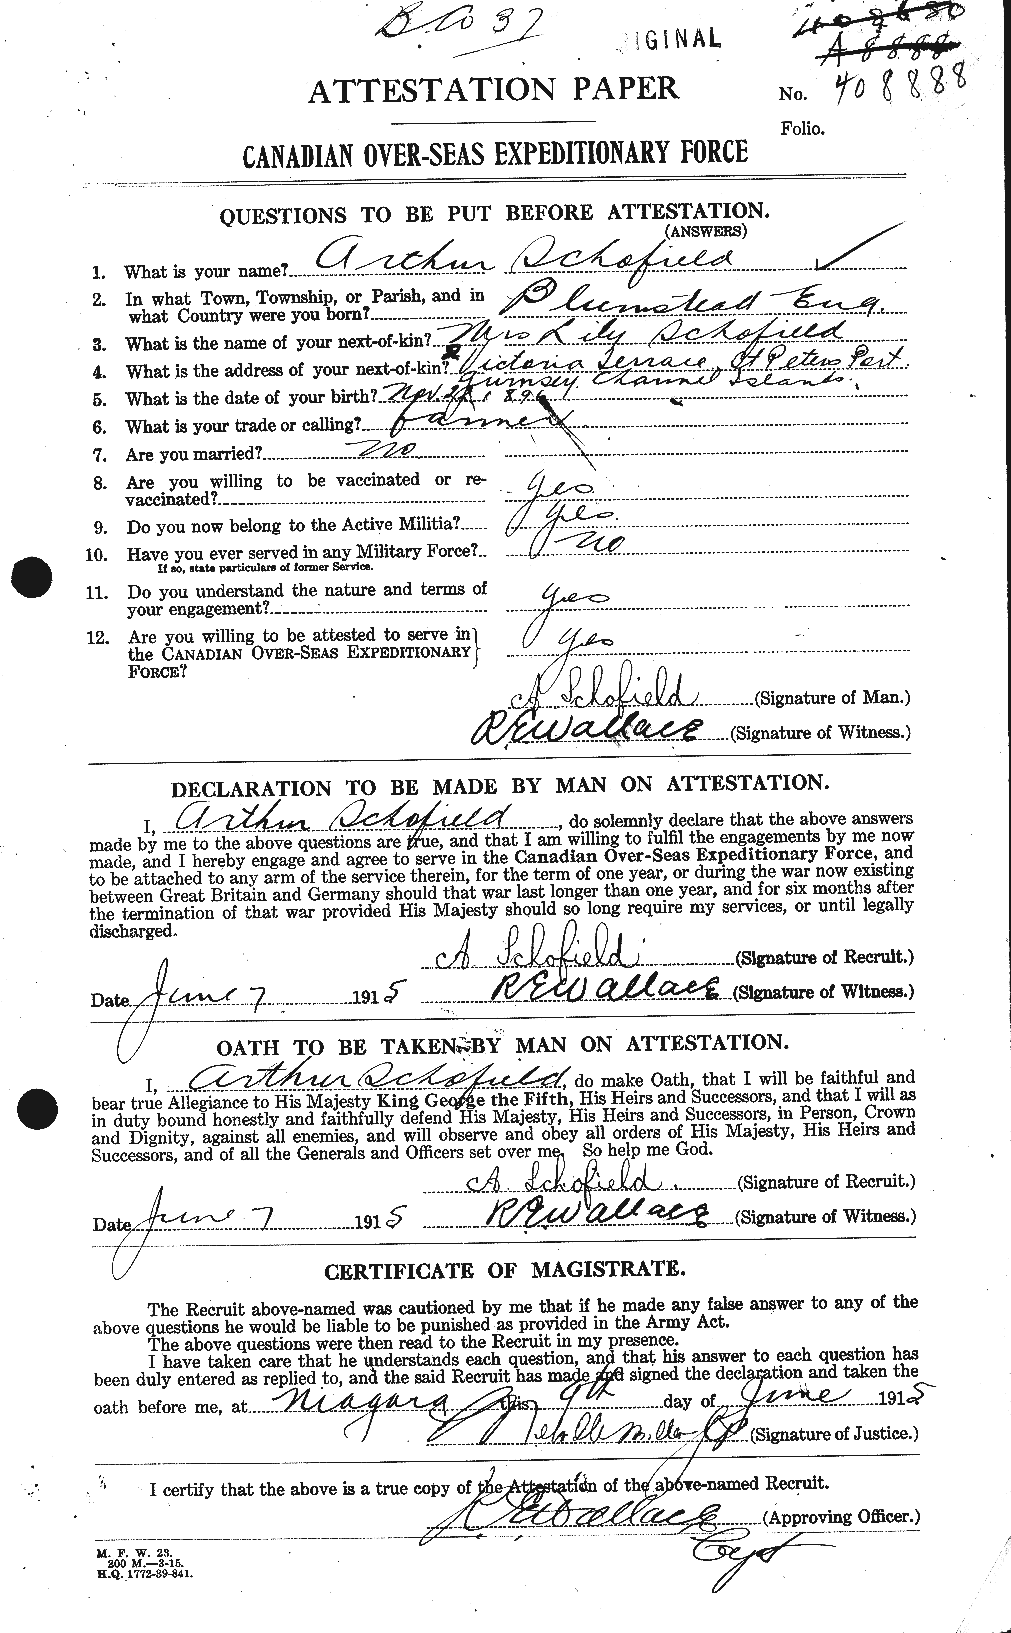 Personnel Records of the First World War - CEF 082220a